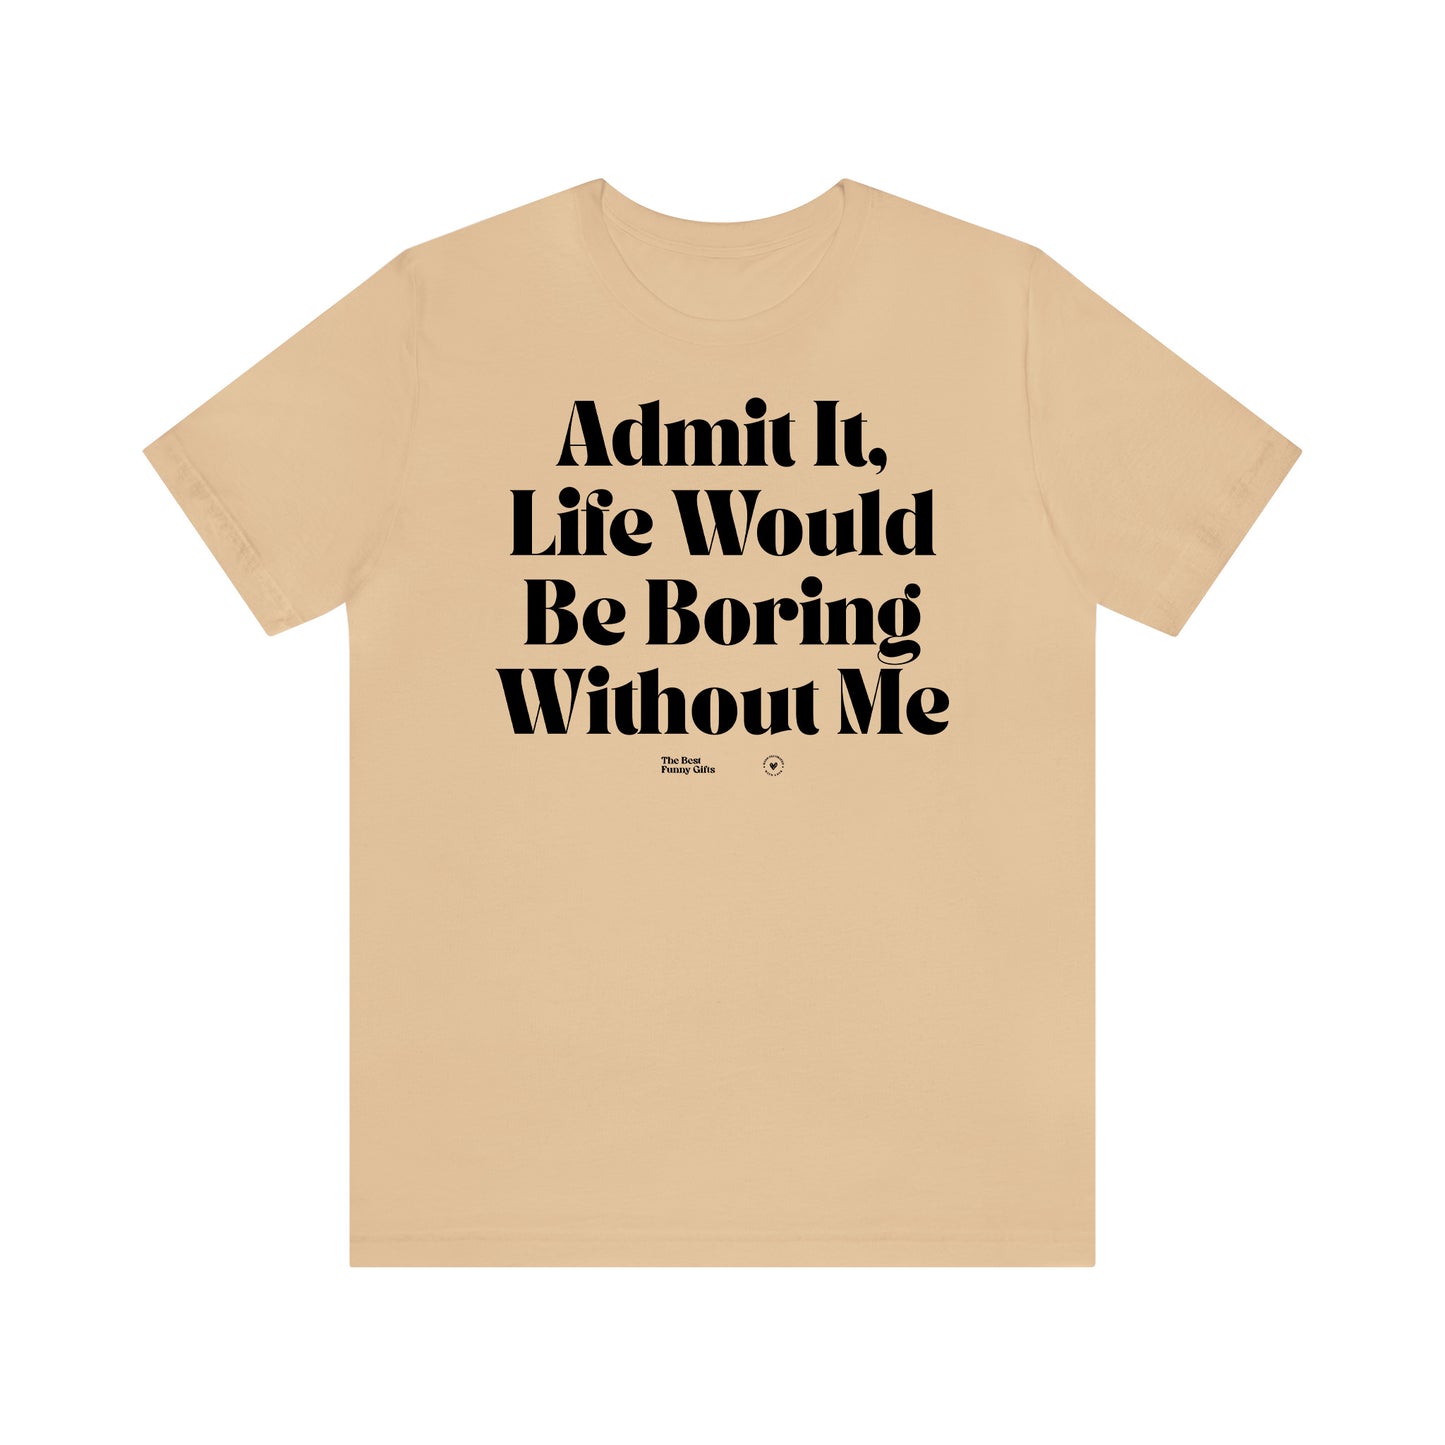 Funny Shirts for Women - Admit It, Life Would Be Boring Without Me - Women’s T Shirts